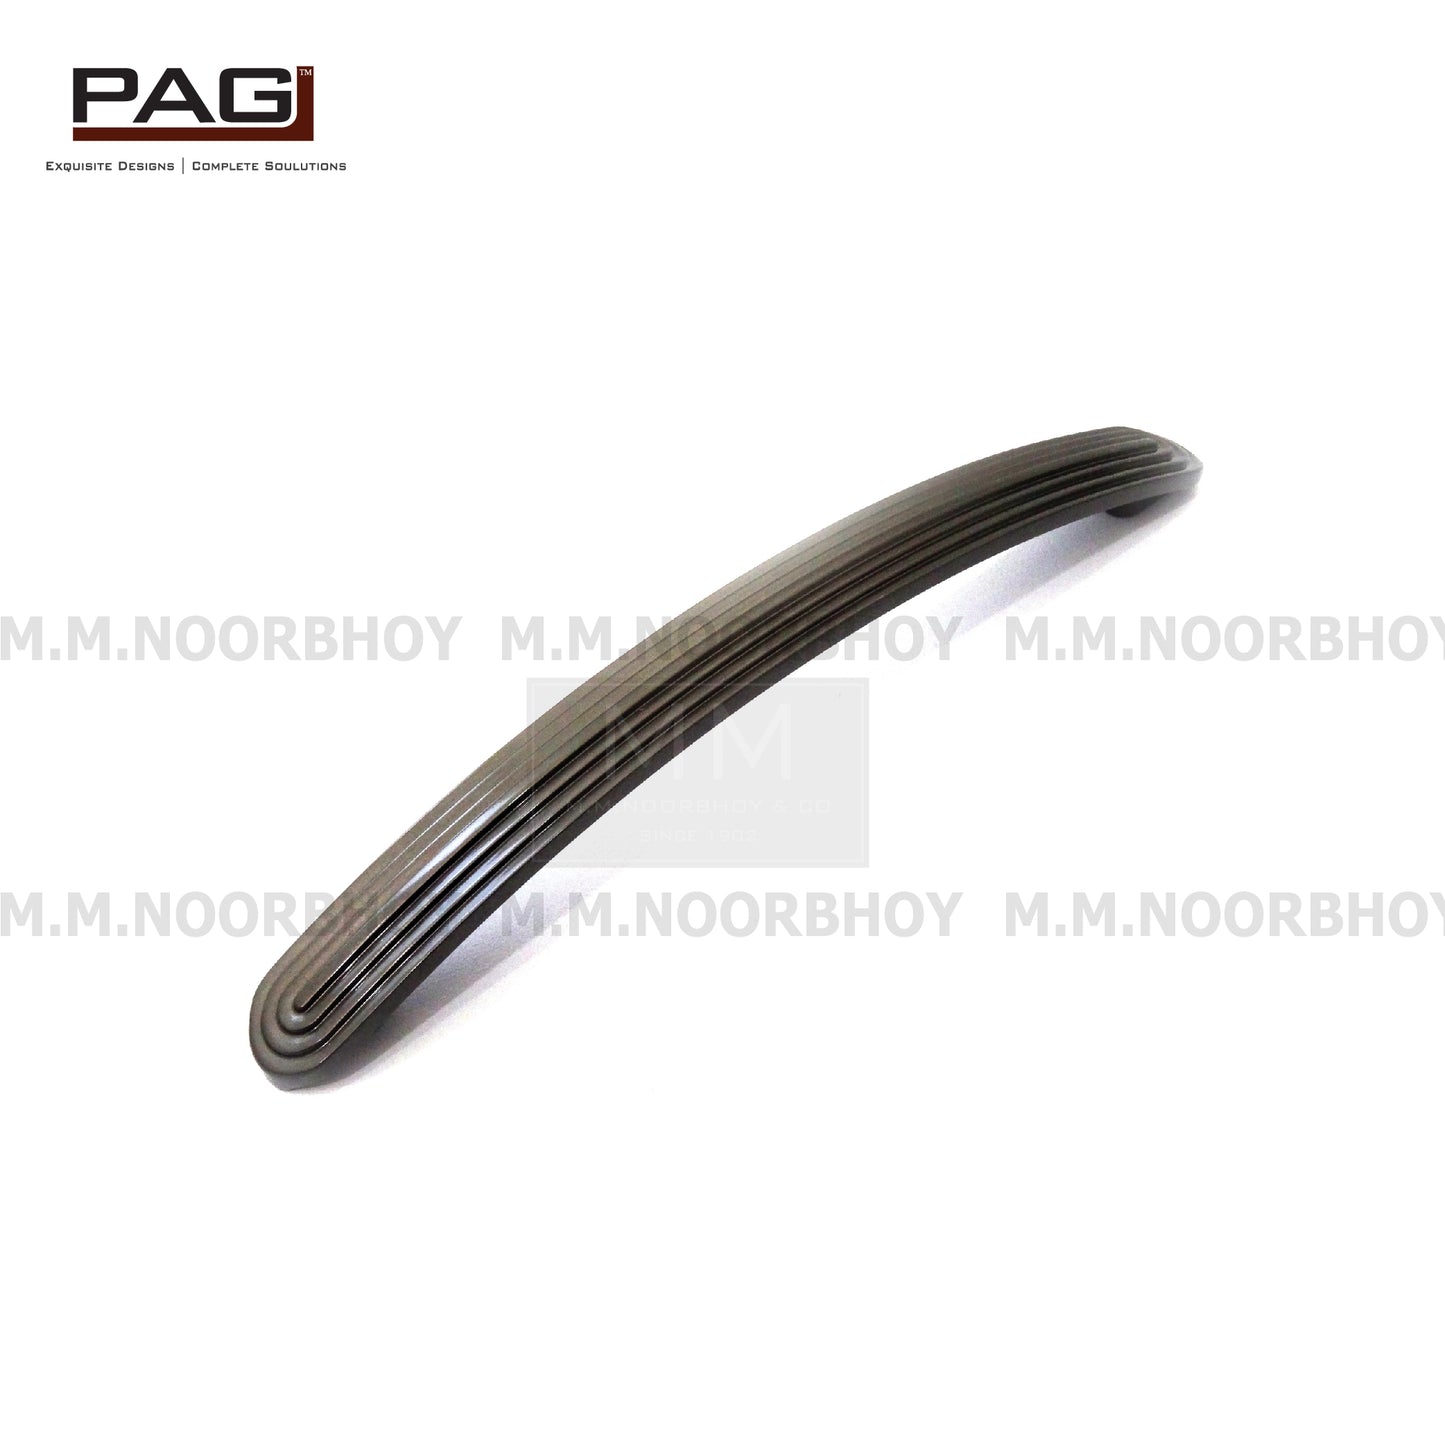 Pag Cabinet Handle Sizes 32mm to 320mm Antique Brass & Brushed Nickel Finish - P2680